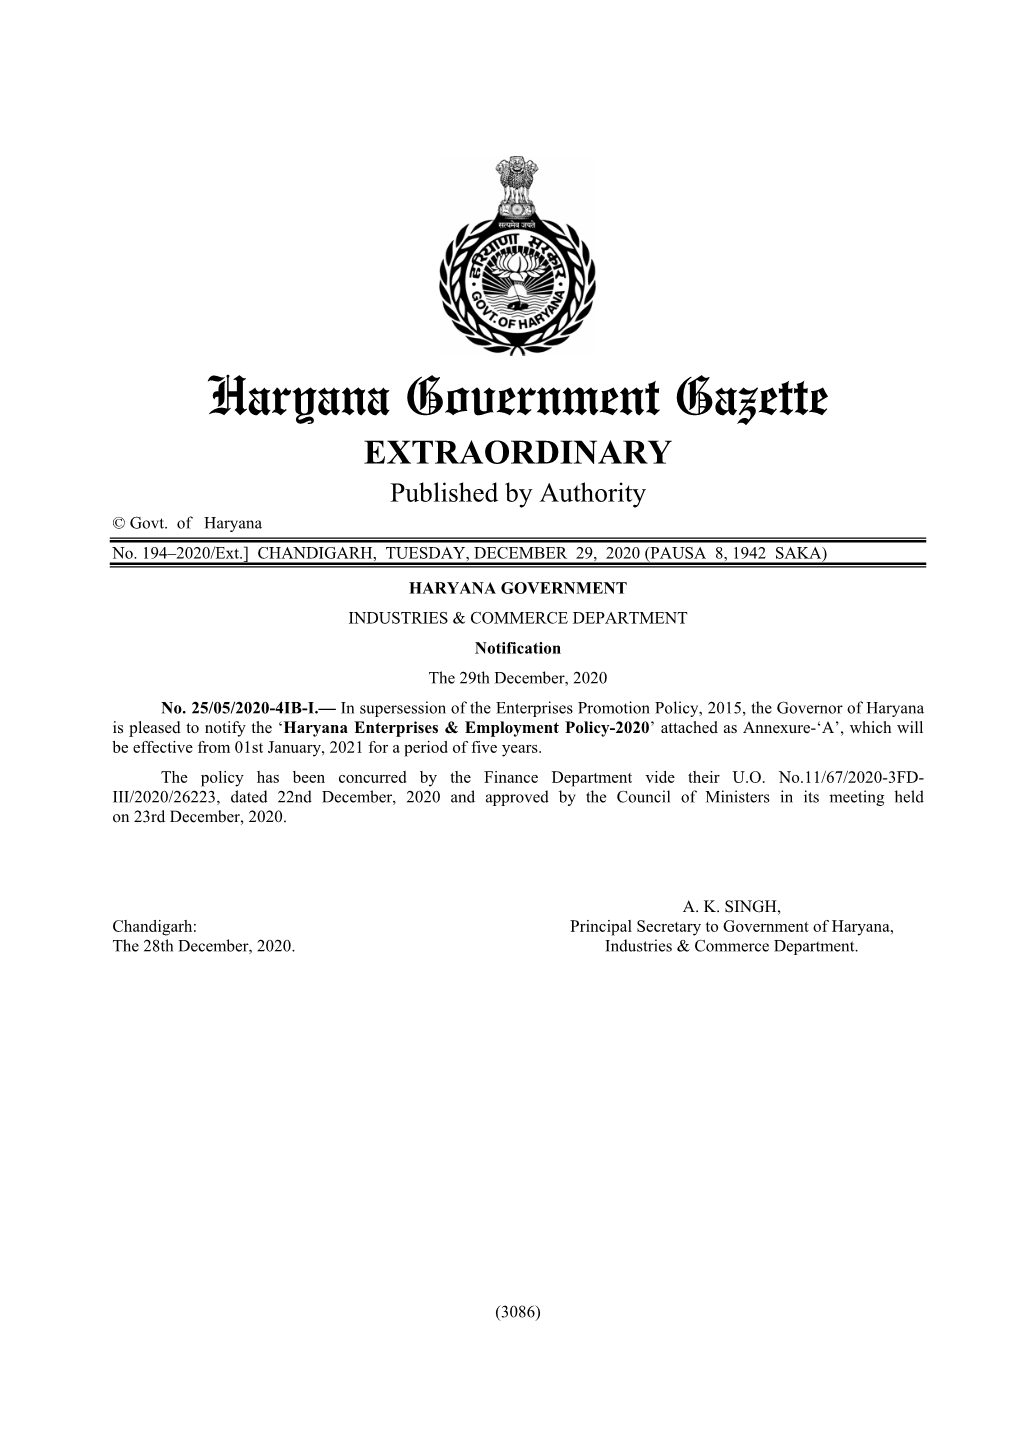 HARYANA ENTERPRISES and EMPLOYMENT POLICY, 2020 Department of Industries and Commerce, Government of Haryana